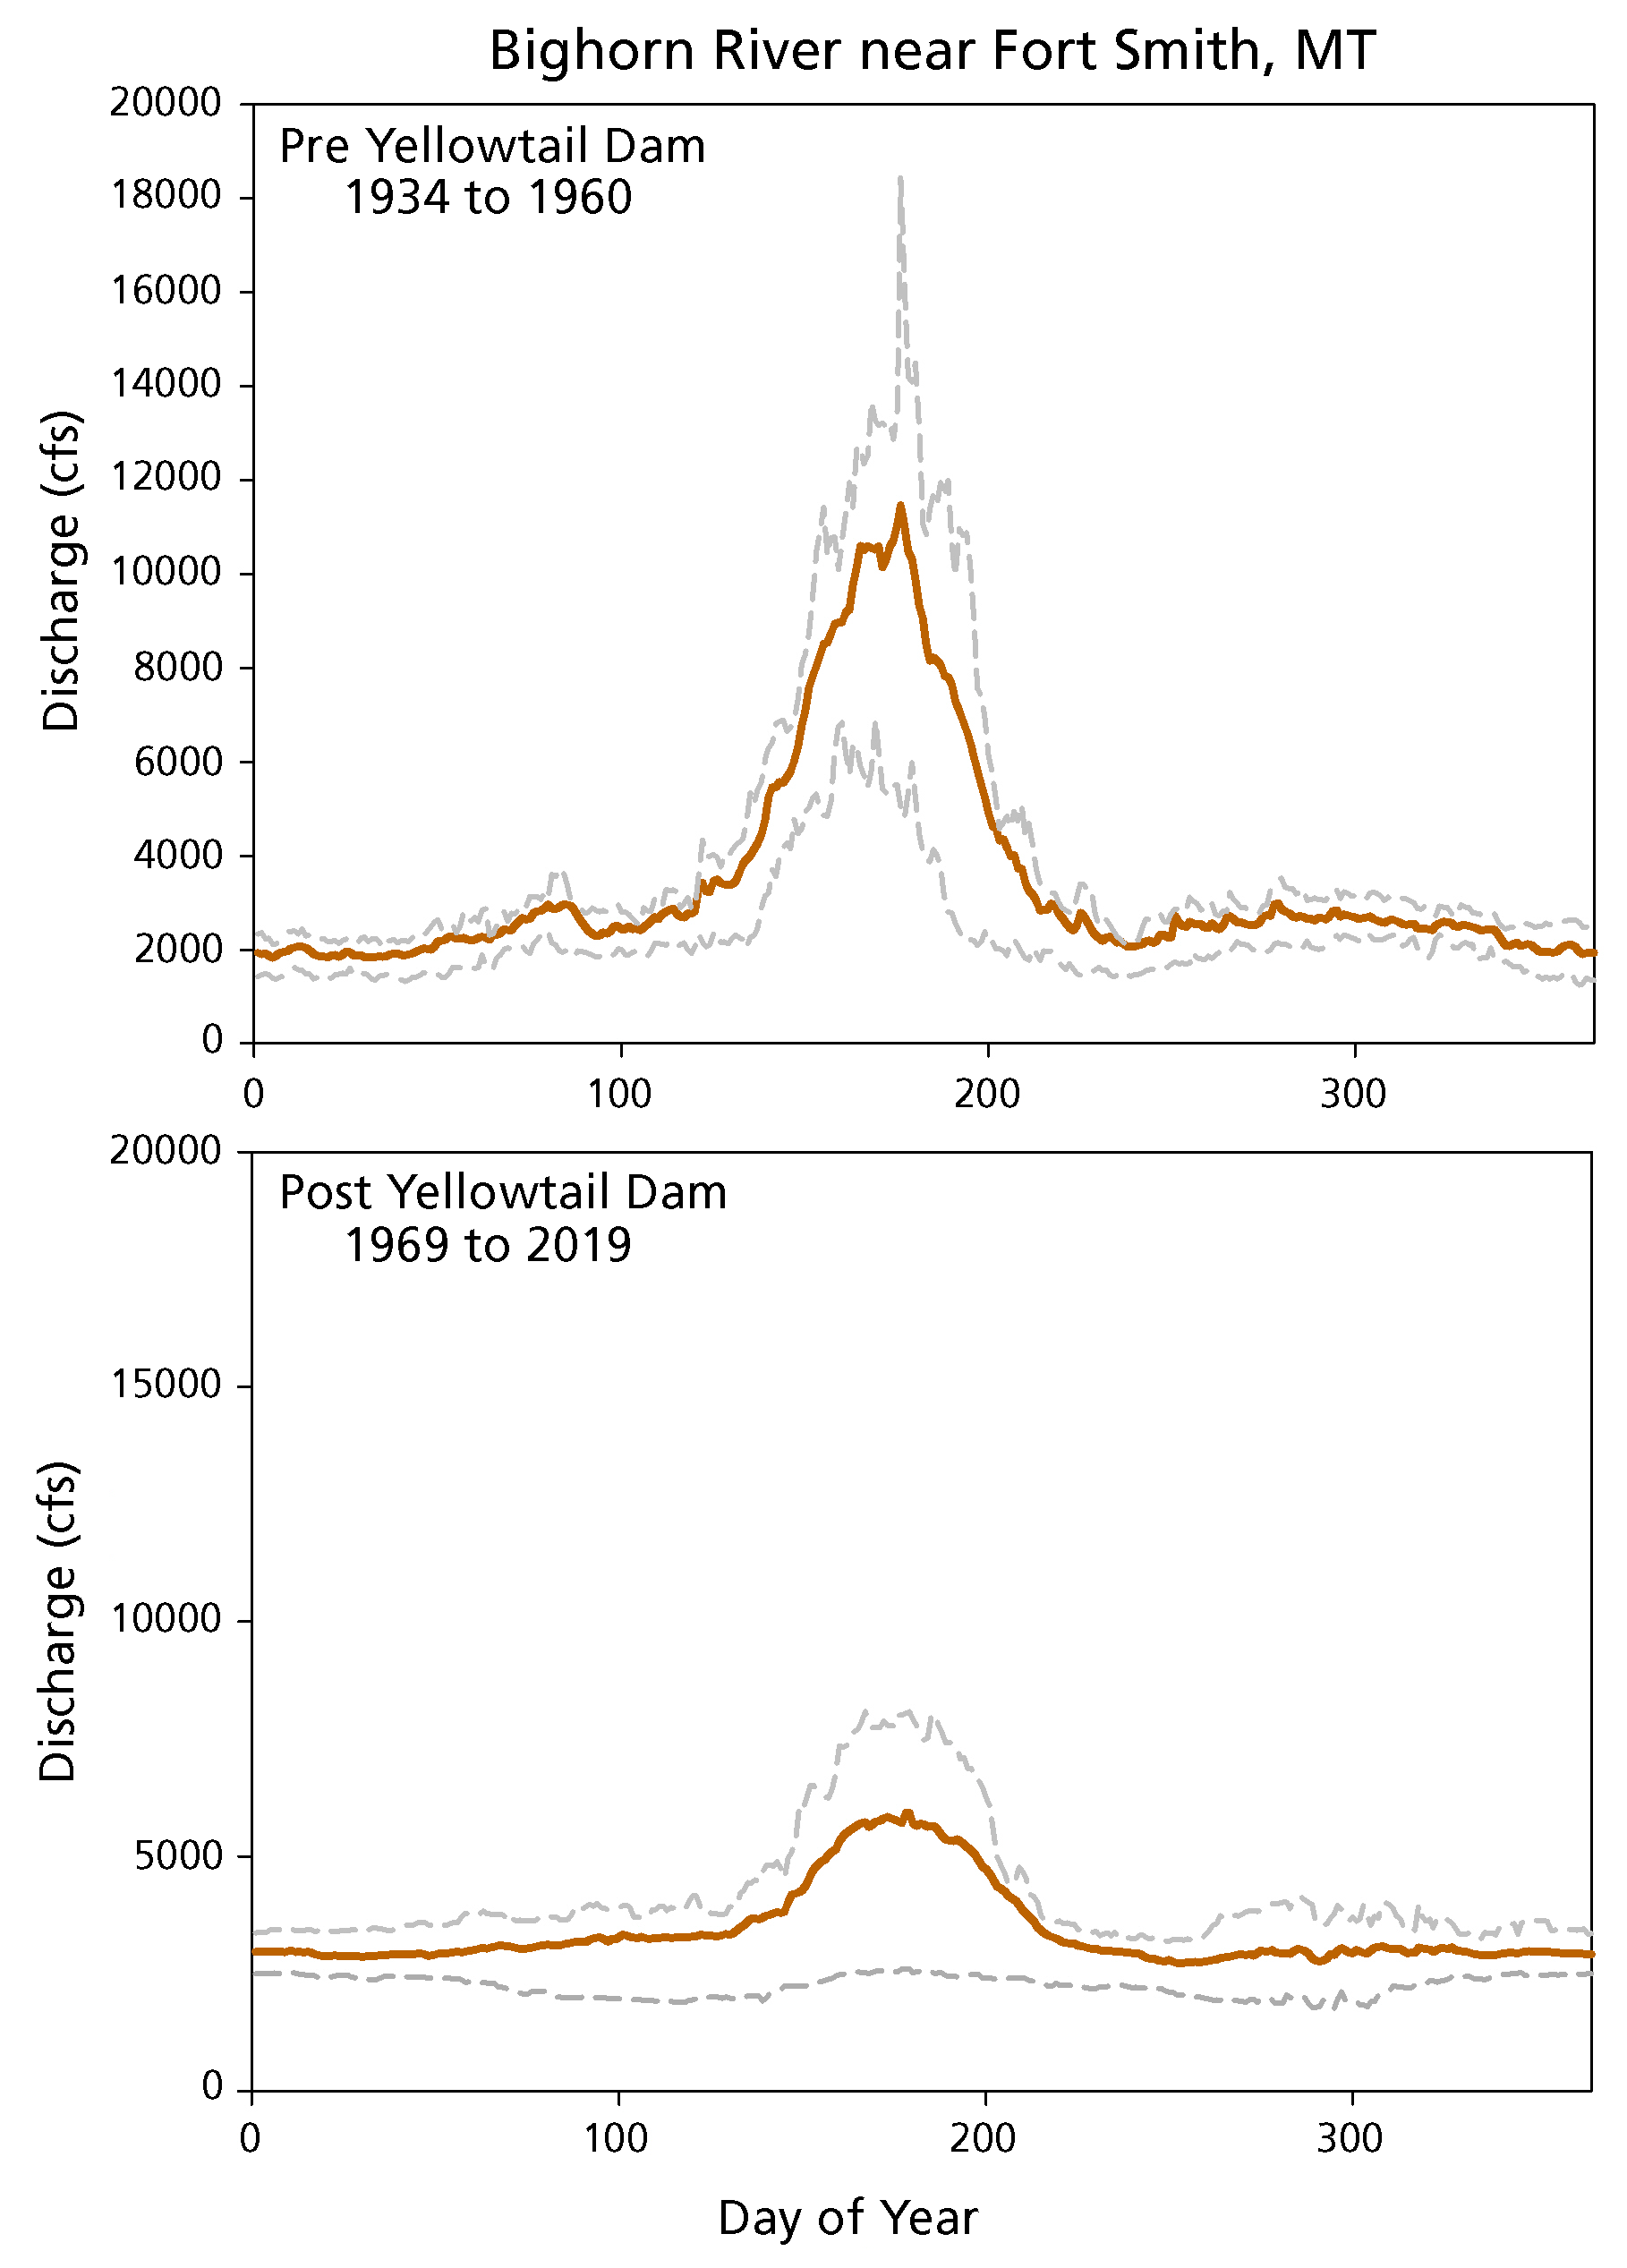 Line graphs of discharge on the Bighorn River near Fort Smith, MT, before and after the Yellowtail Dam